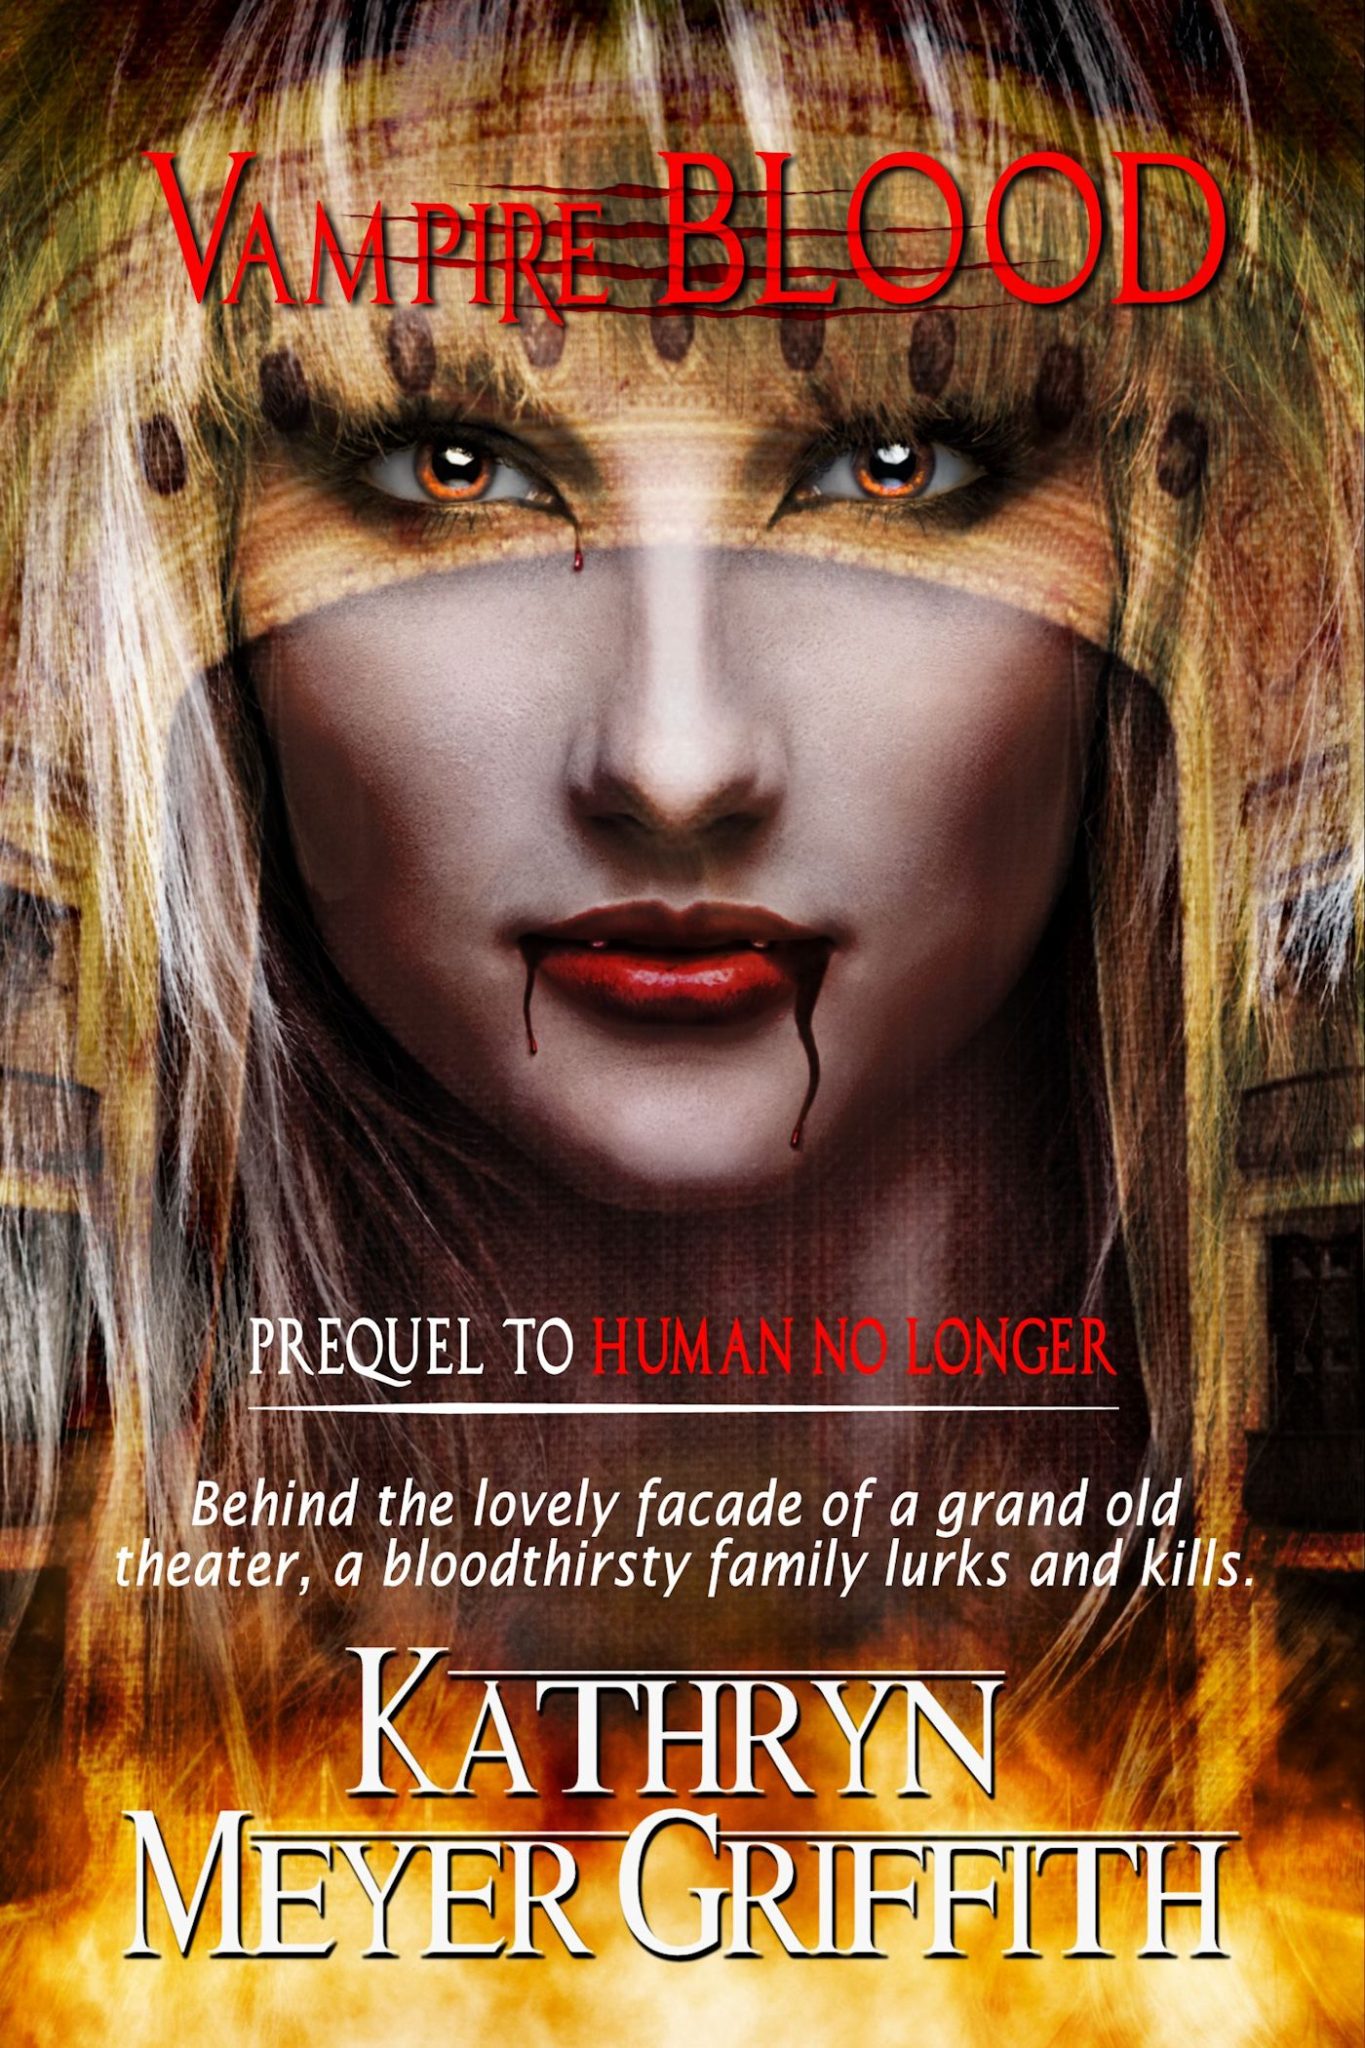 FREE: Vampire Blood by Kathryn Meyer Griffith